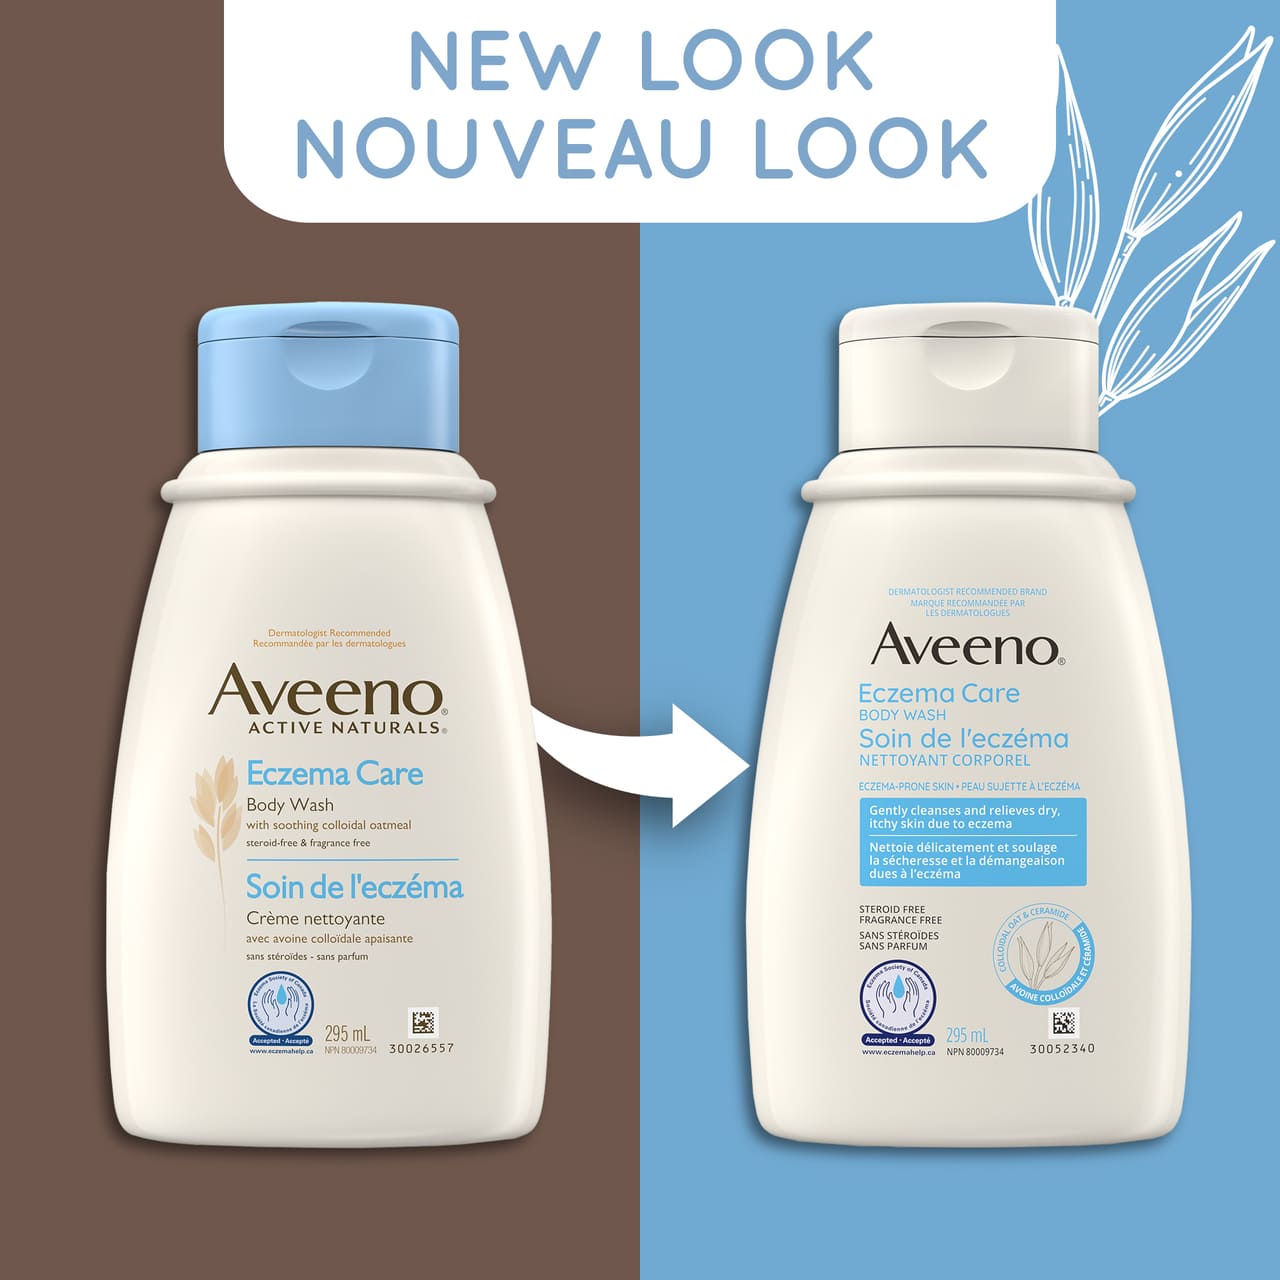 Old and new packaging of AVEENO® Eczema Care Body Wash, 295 mL bottles, with text 'new look'